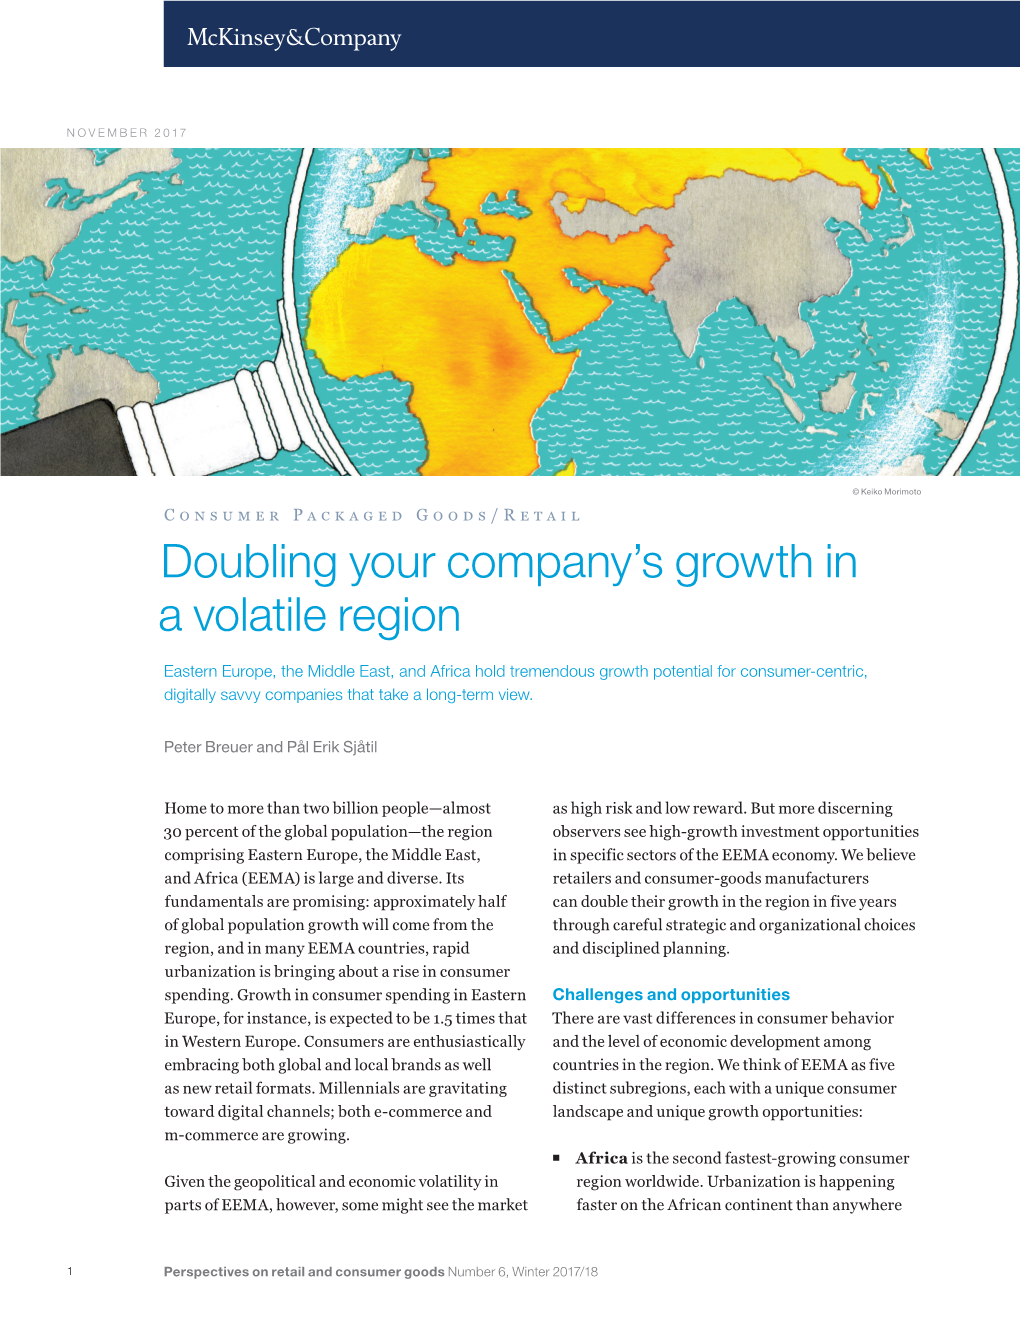 Doubling Your Company's Growth in a Volatile Region